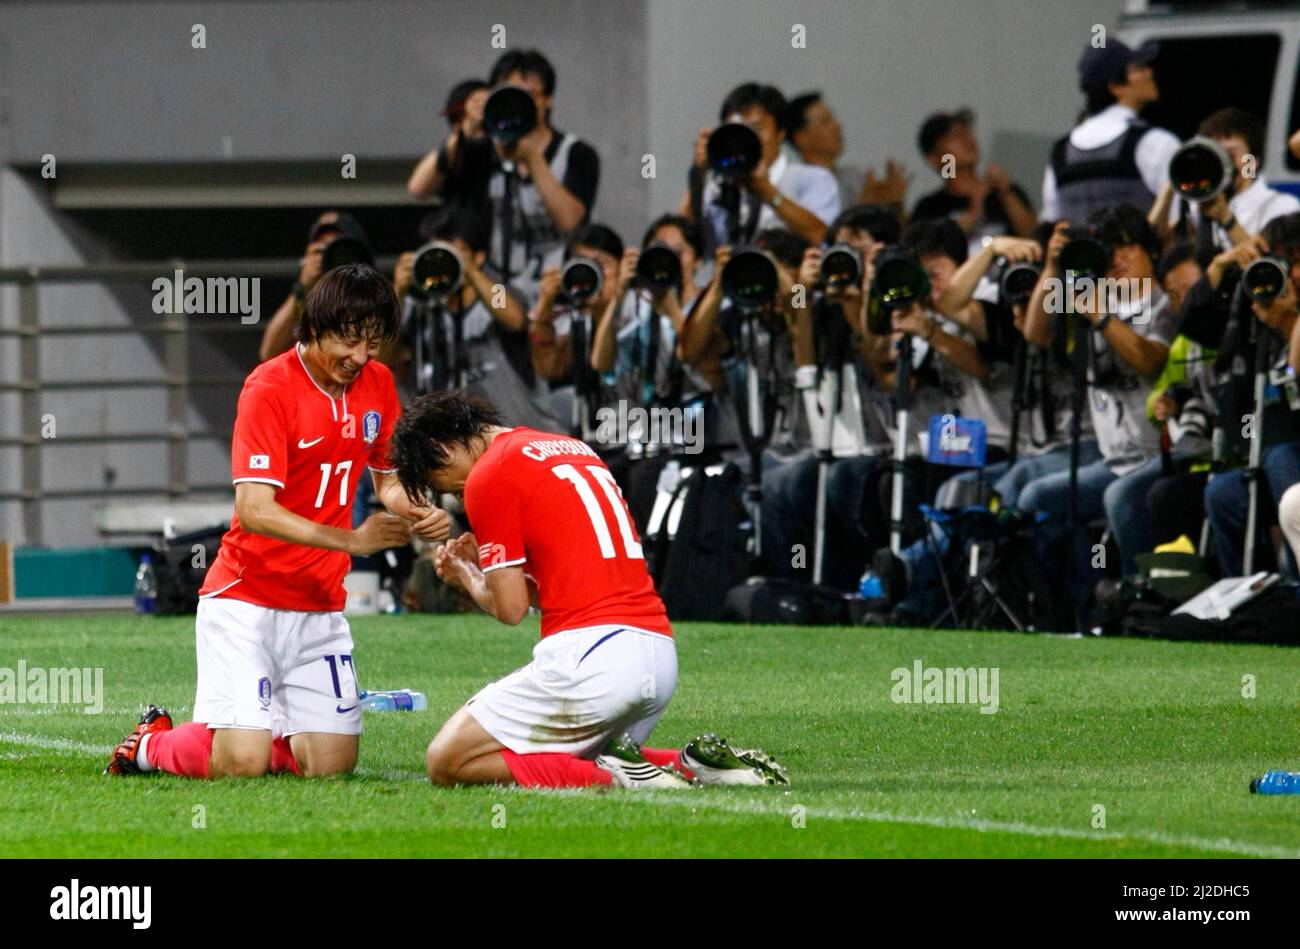 Aug 12, 2009-Seoul, South Korea-Park Chu-Young(r), South Korea, celebrates after scoring a goal during their friendly soccer match against Paraguay at the Seoul World Cup stadium August 12, 2009. Stock Photo